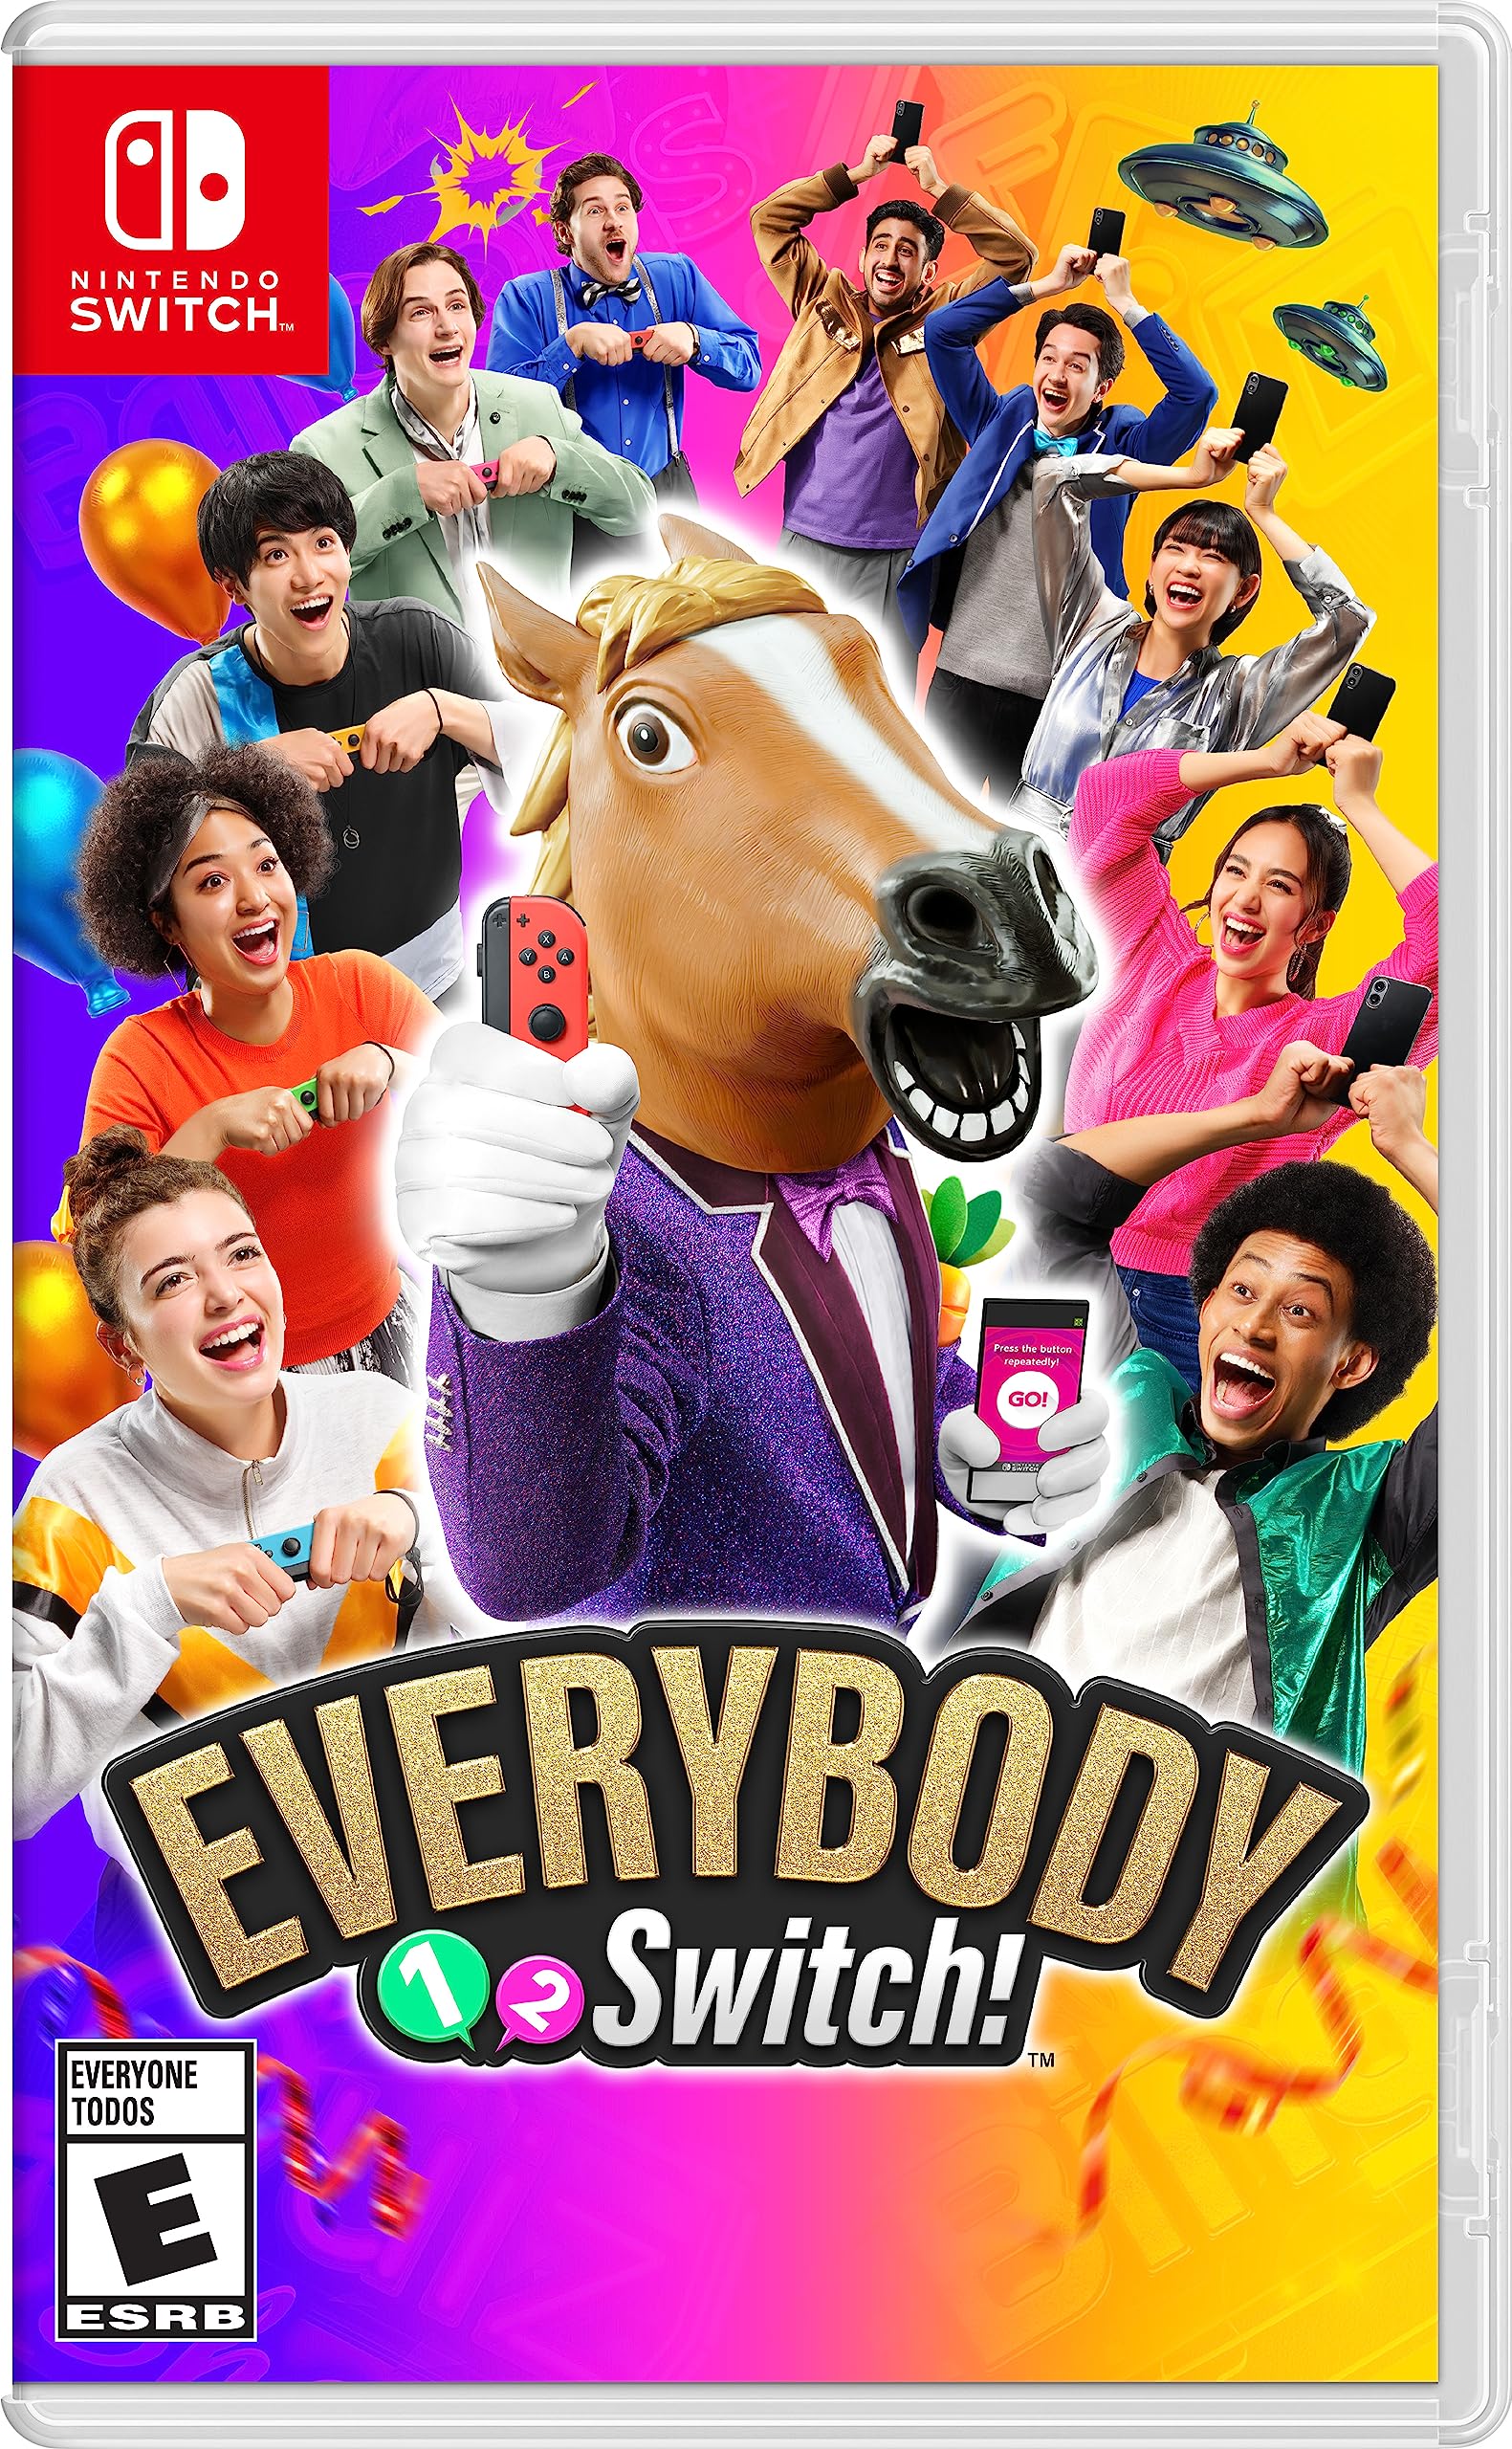 Everybody 1-2 Switch! (Nintendo Switch, Physical) $21.99 + Free Shipping w/ Prime or on orders over $35